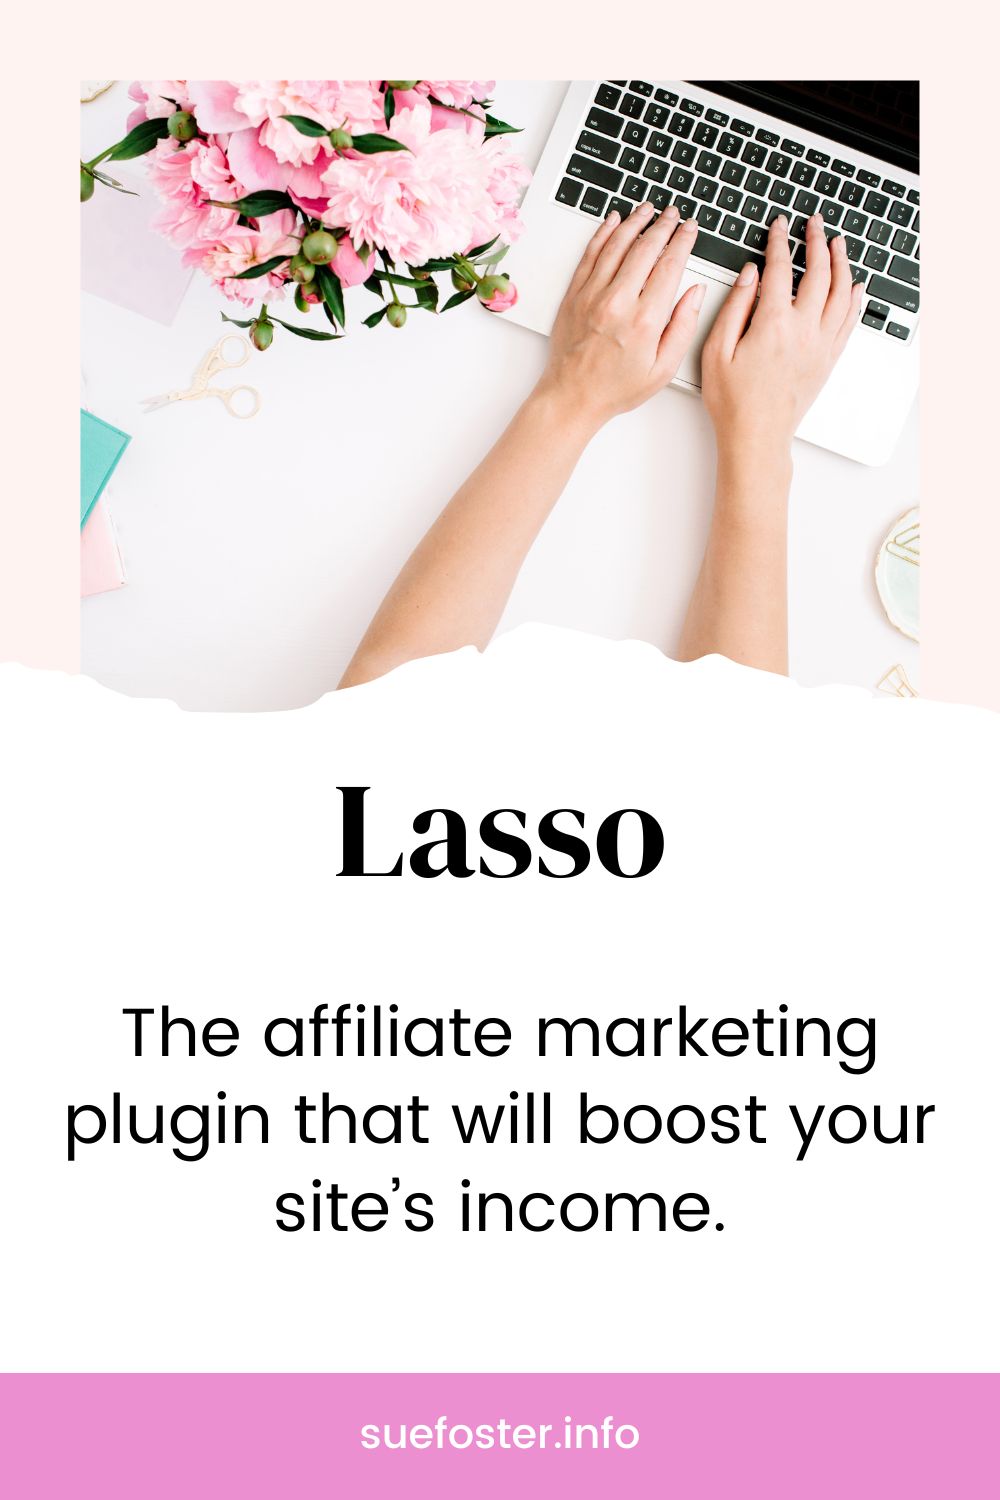 Boost your site’s income with Lasso, an all-in-one solution for efficient link management, engaging product displays, and click tracking.